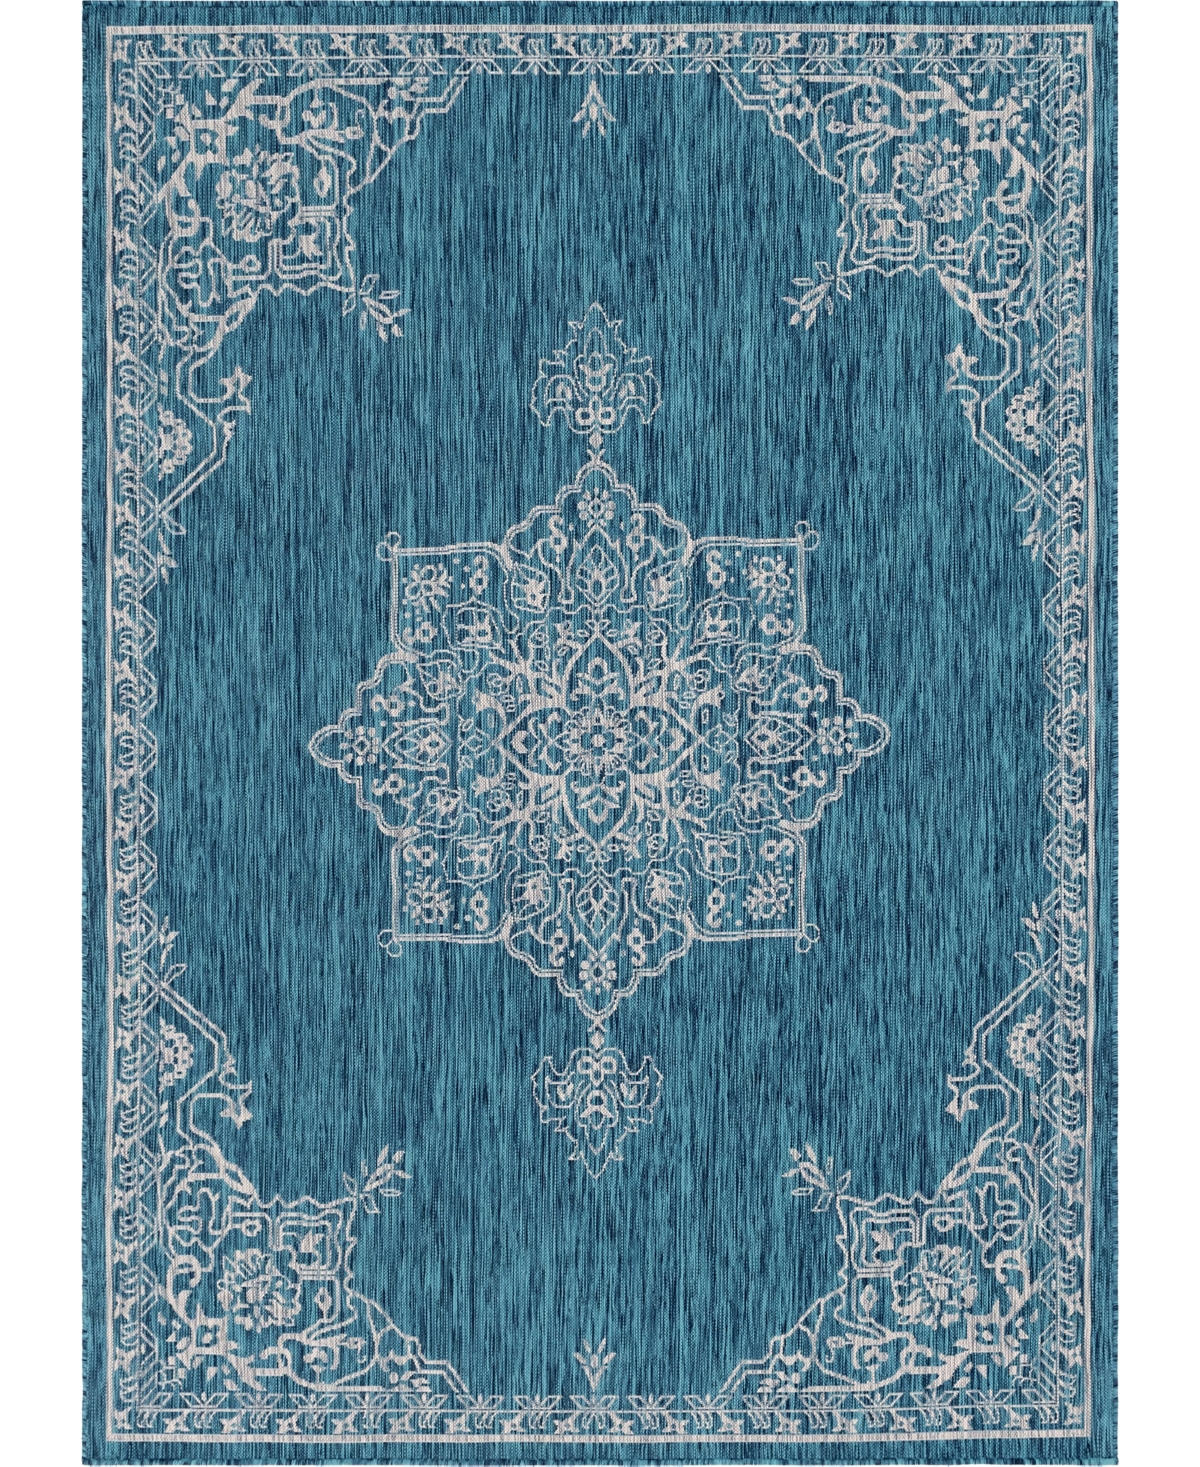 Bayshore Home Outdoor Bh Pashio Traditional Ii Antique 7' X 10' Area Rug In Teal